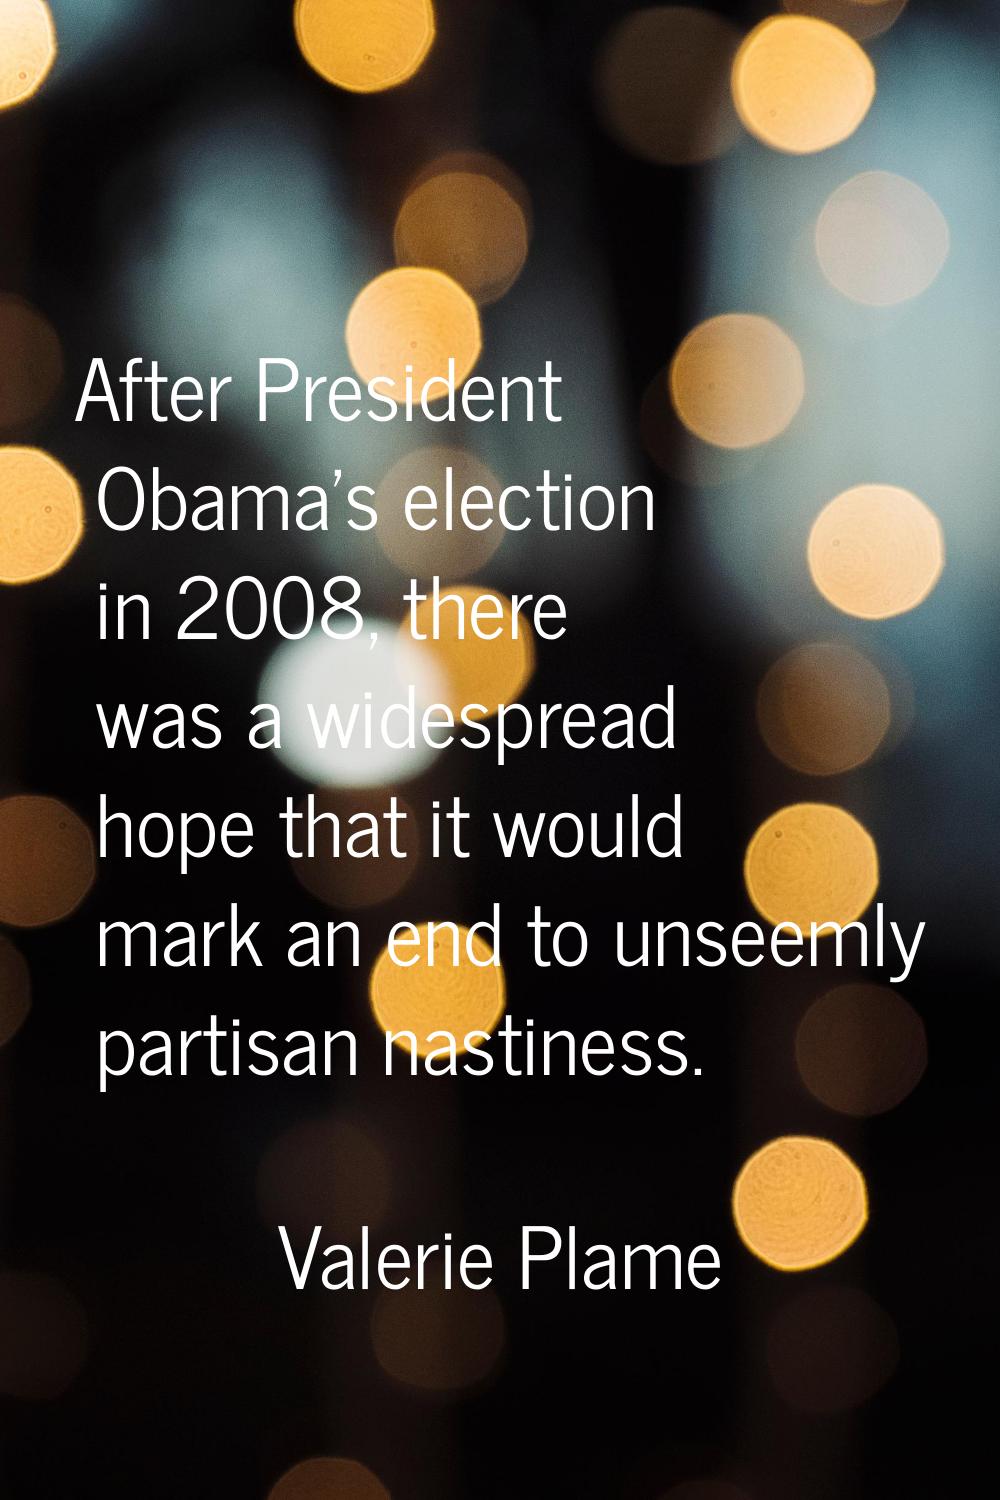 After President Obama's election in 2008, there was a widespread hope that it would mark an end to 